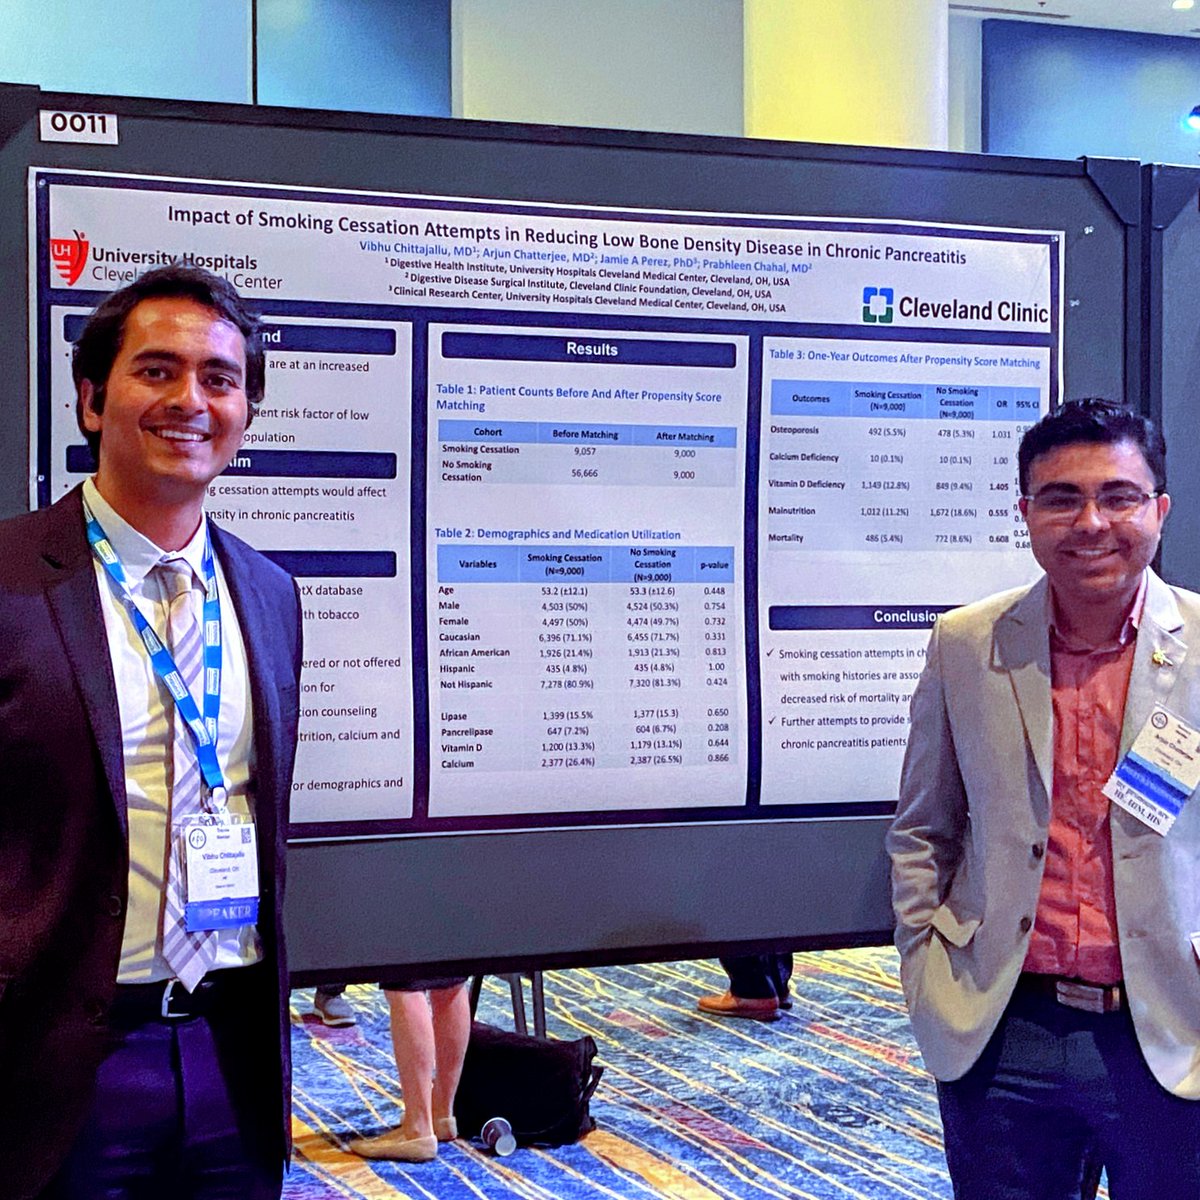 Sharing our work on outcomes smoking cessation in chronic pancreatitis patients @ChahalPrabhleen @VibhuC_MD @CWRU_GI @AmCollegeGastro #ACG2022 #ccfgifellows #gitwitter